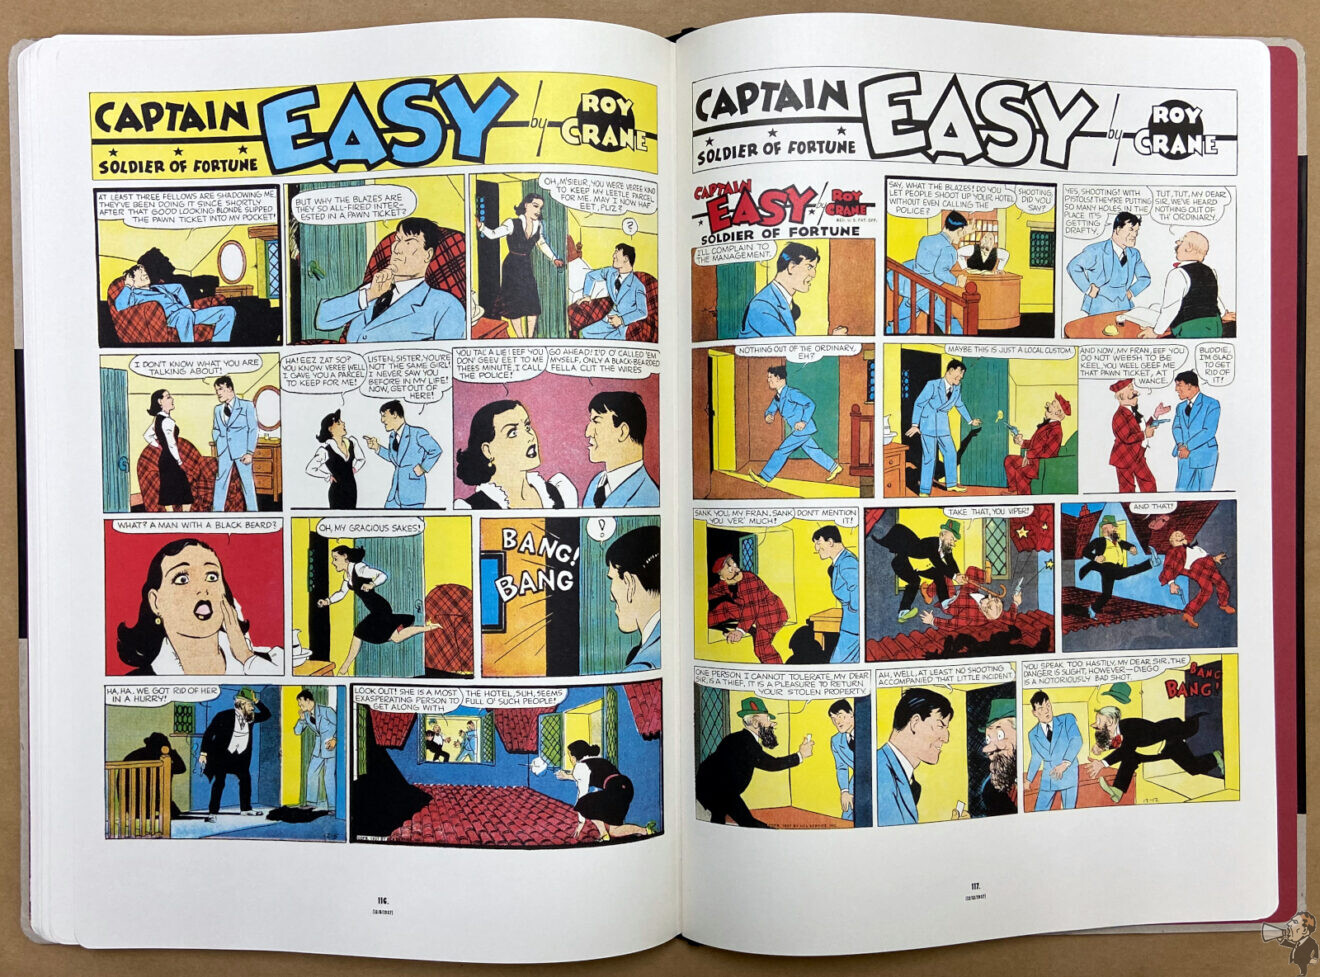 Captain Easy, Soldier of Fortune, Vol. 1 by Roy Crane